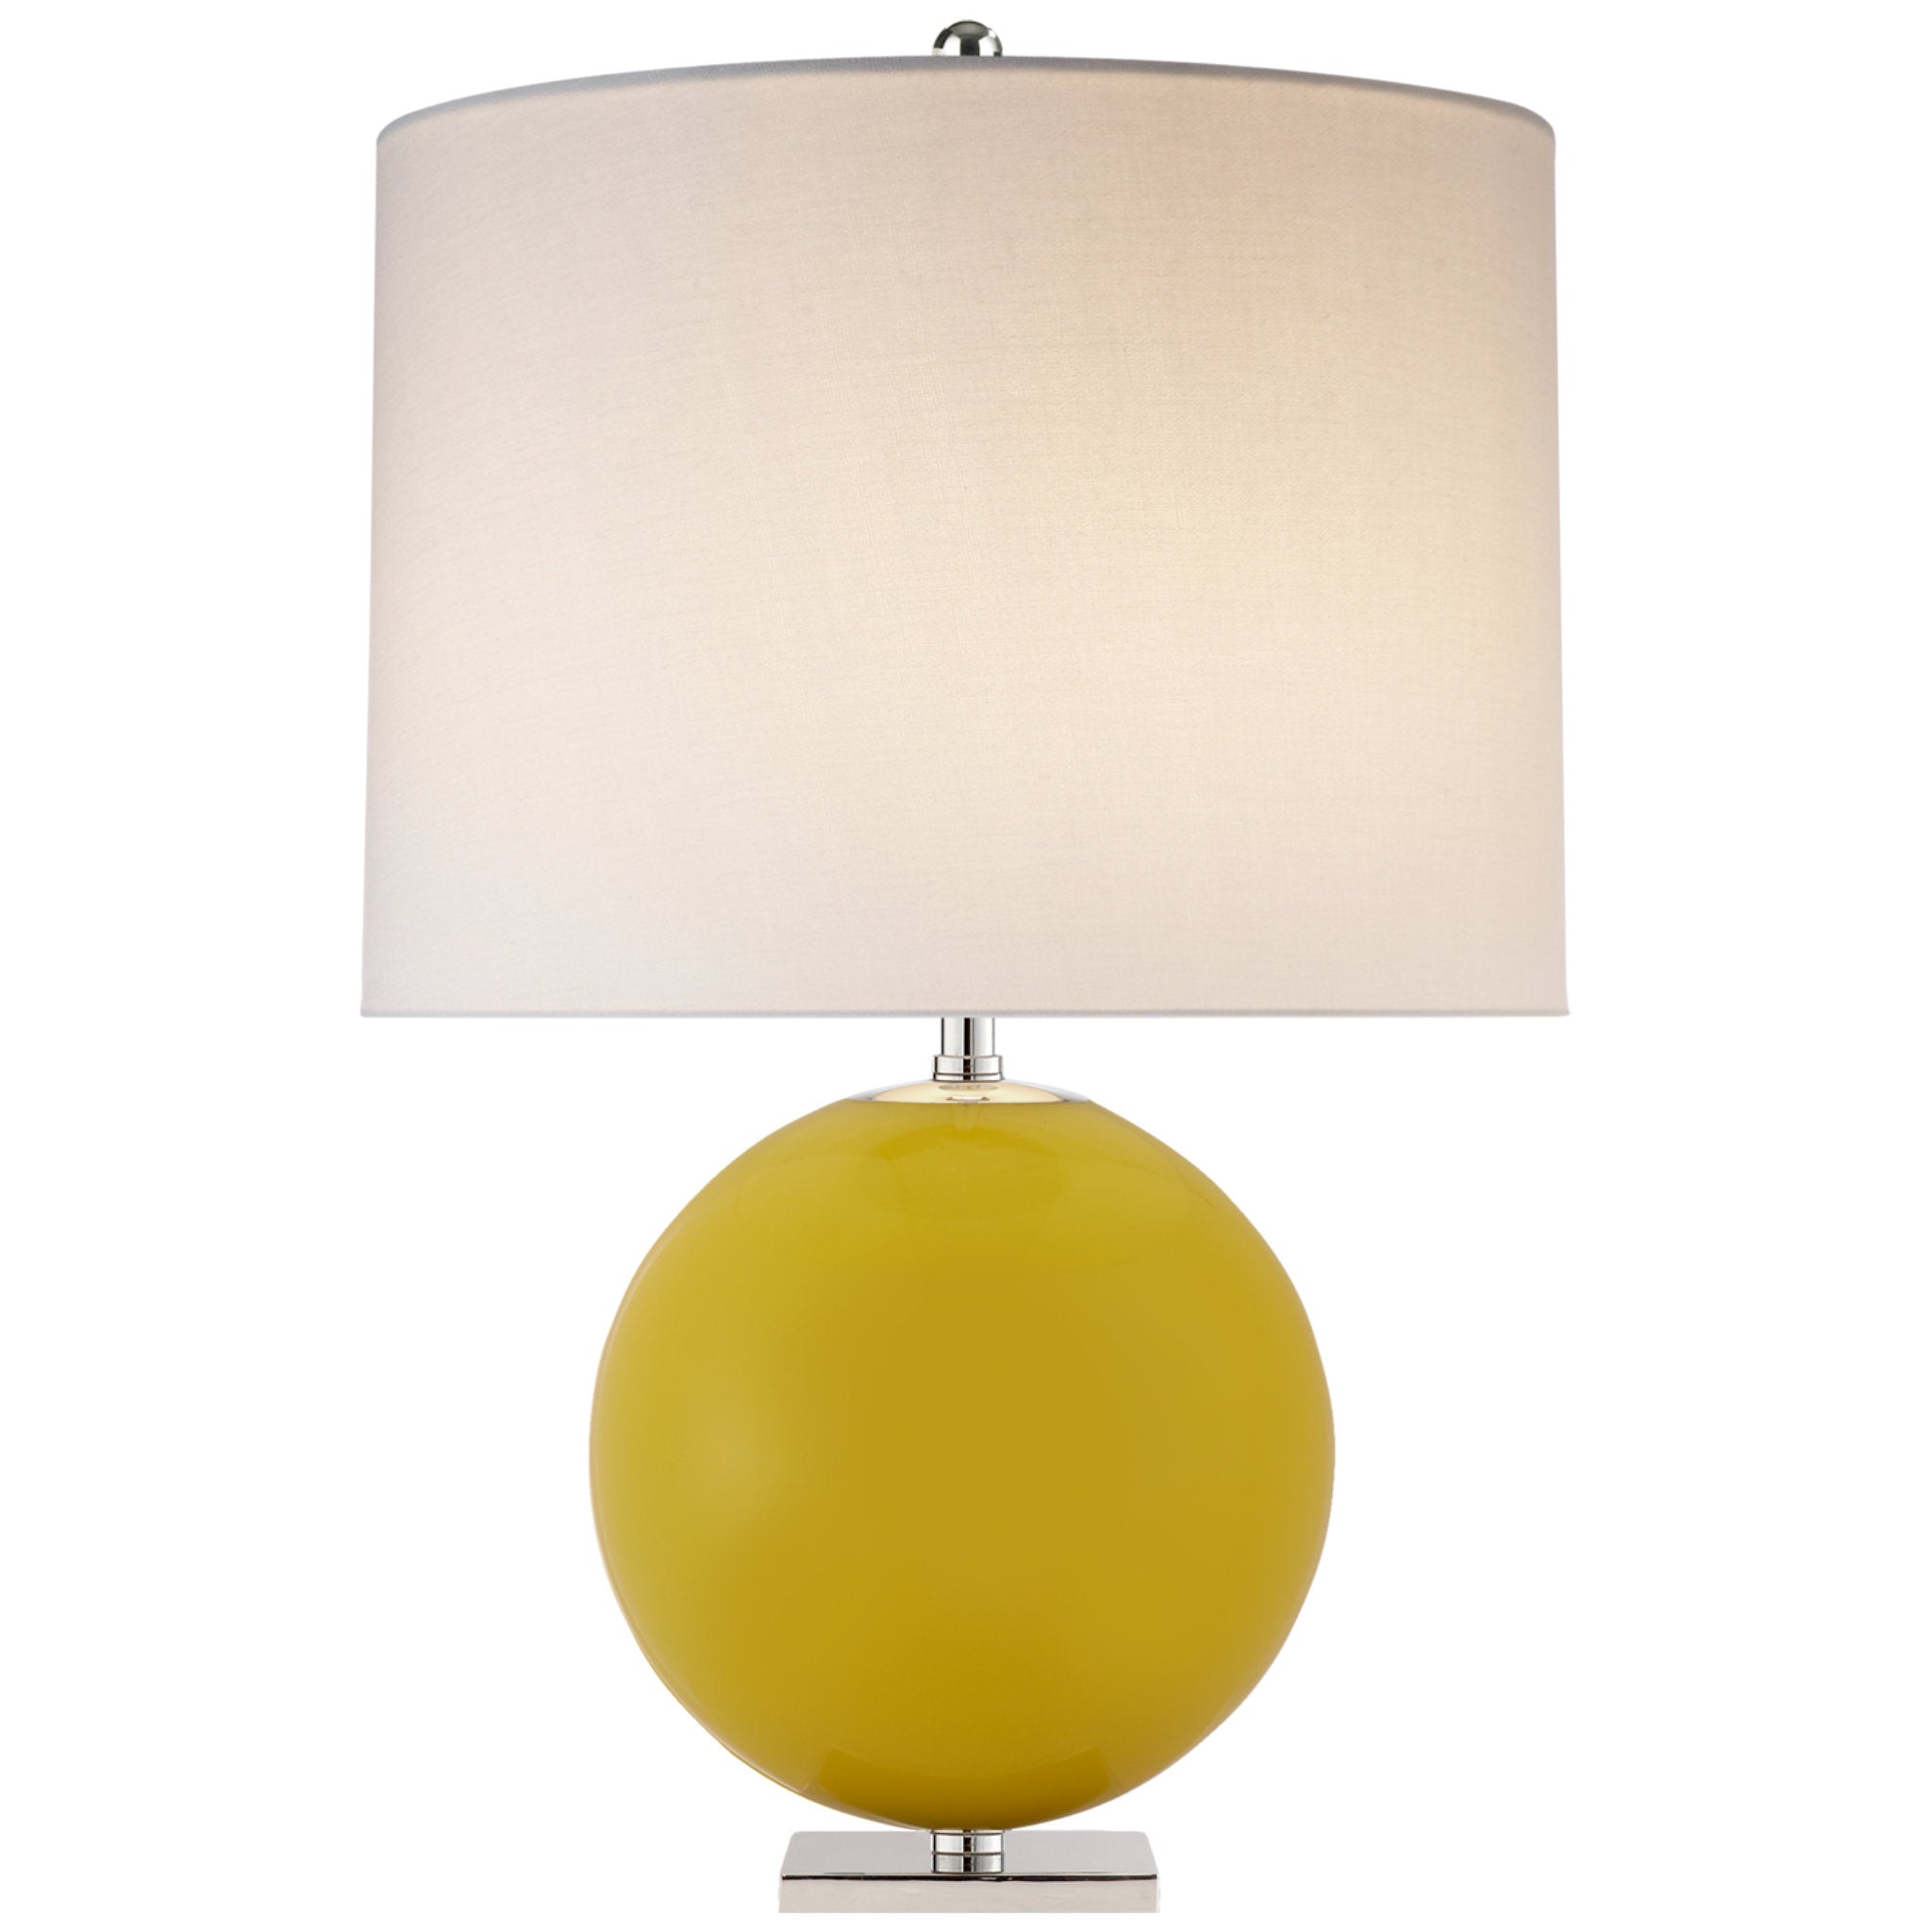 kate spade new york Elsie Table Lamp in Yellow with Linen Shade